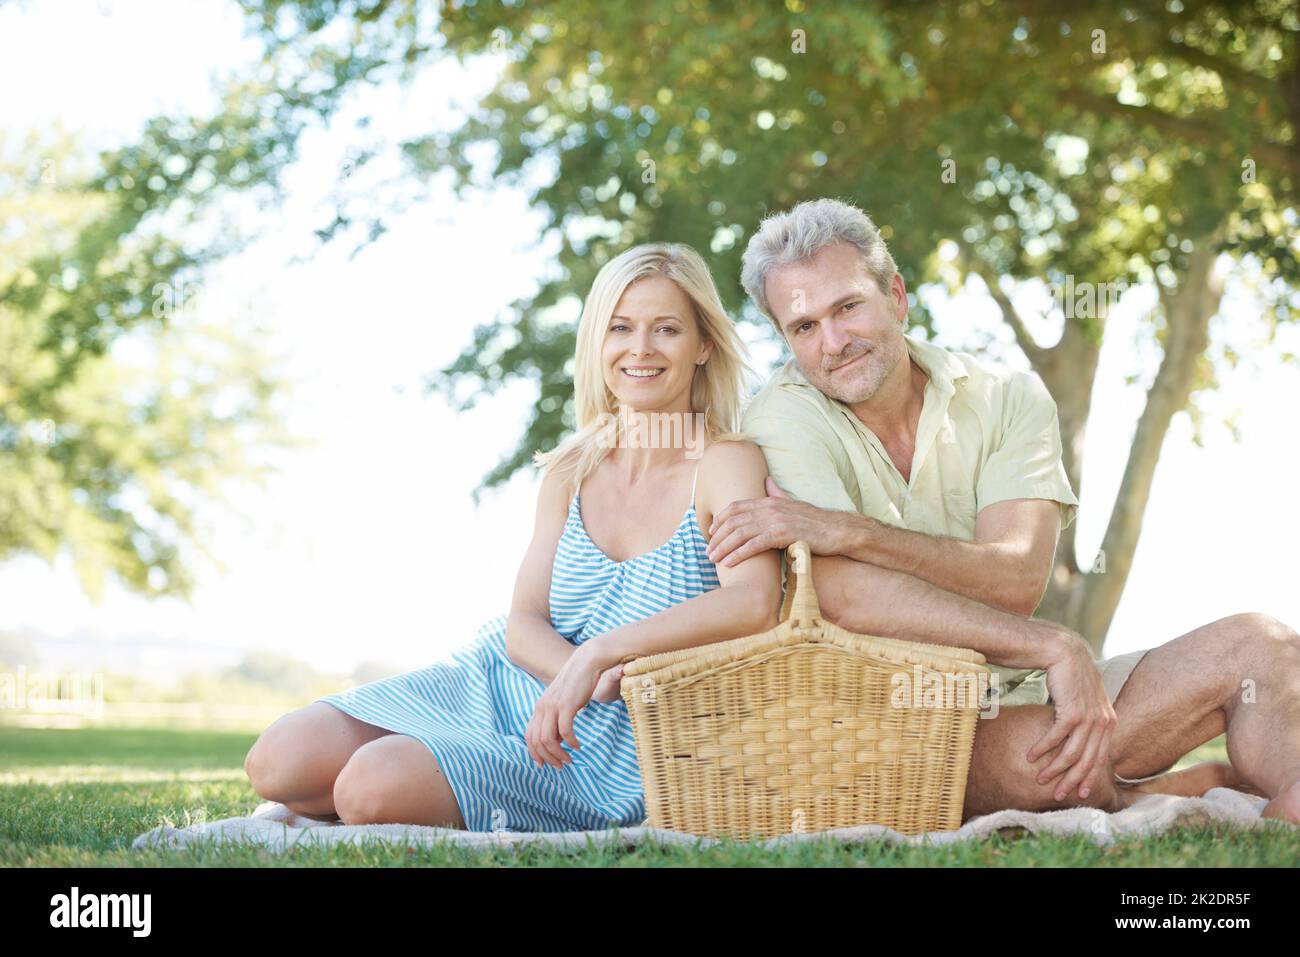 Picnic time in the park. A happy husband and wife sitting in a park with a picnic basket. Stock Photo